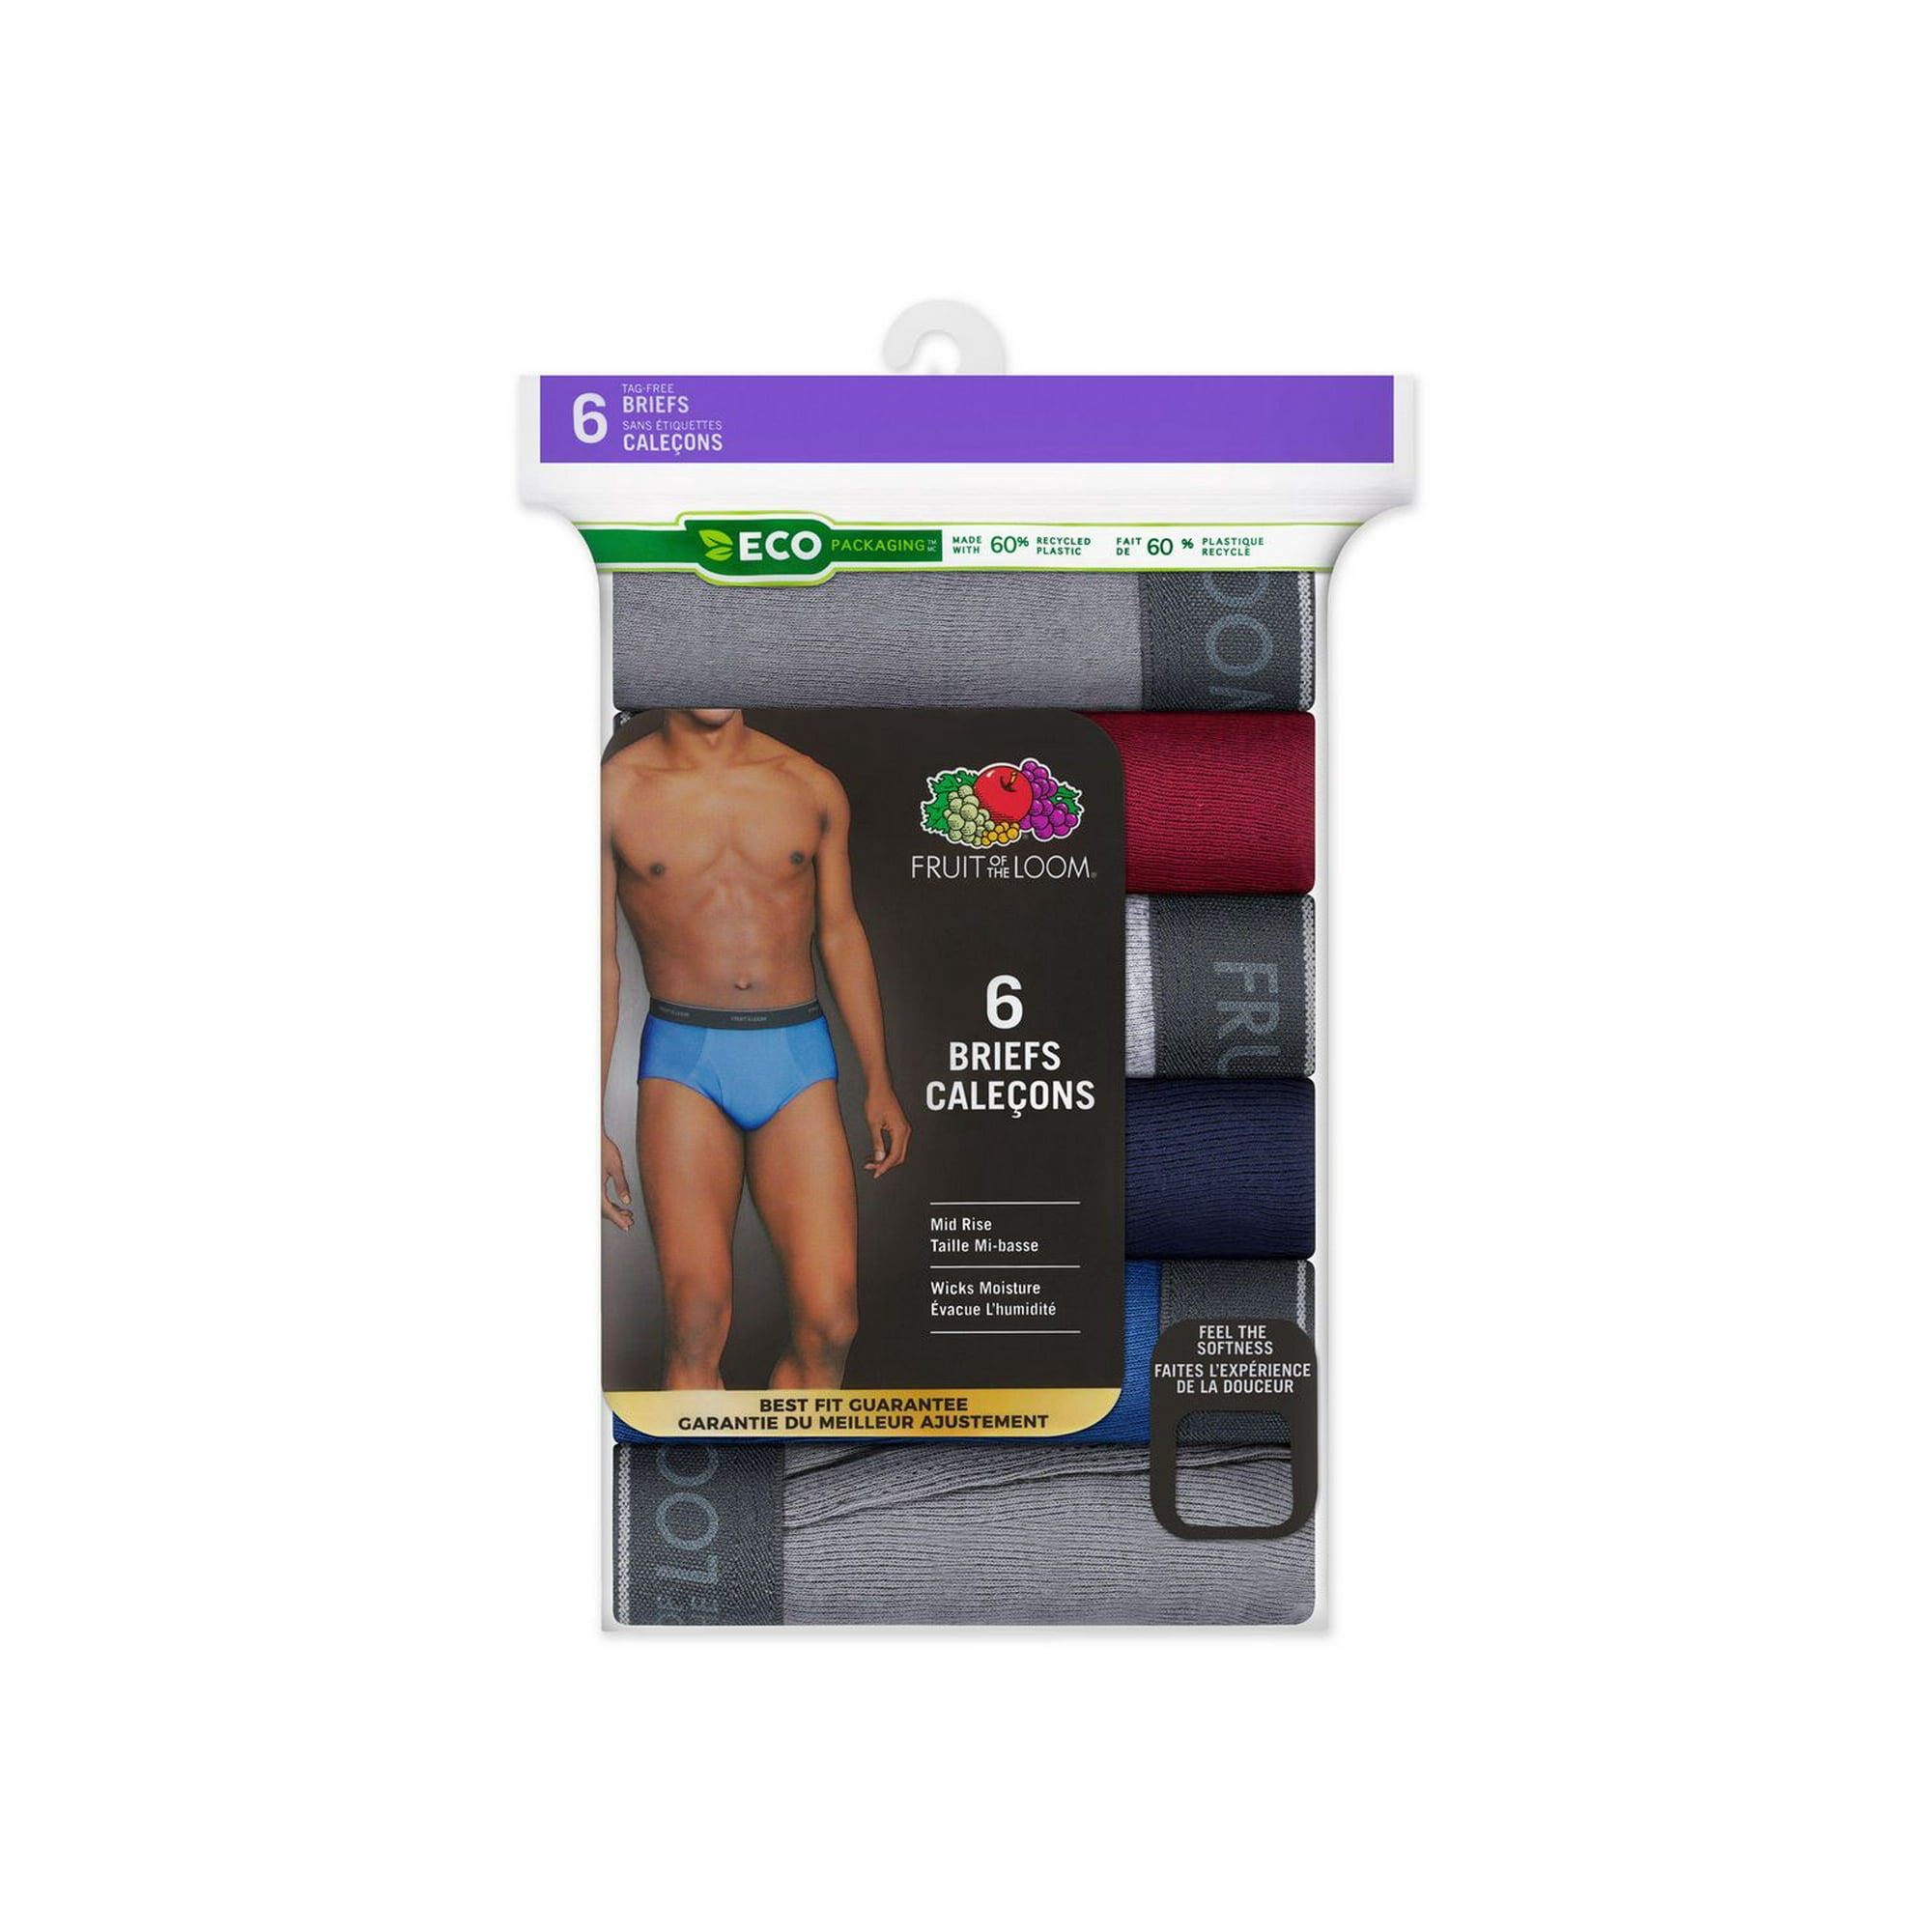 Fruit of the Loom Men's Fashion Briefs - 6-pack, Assorted Colors